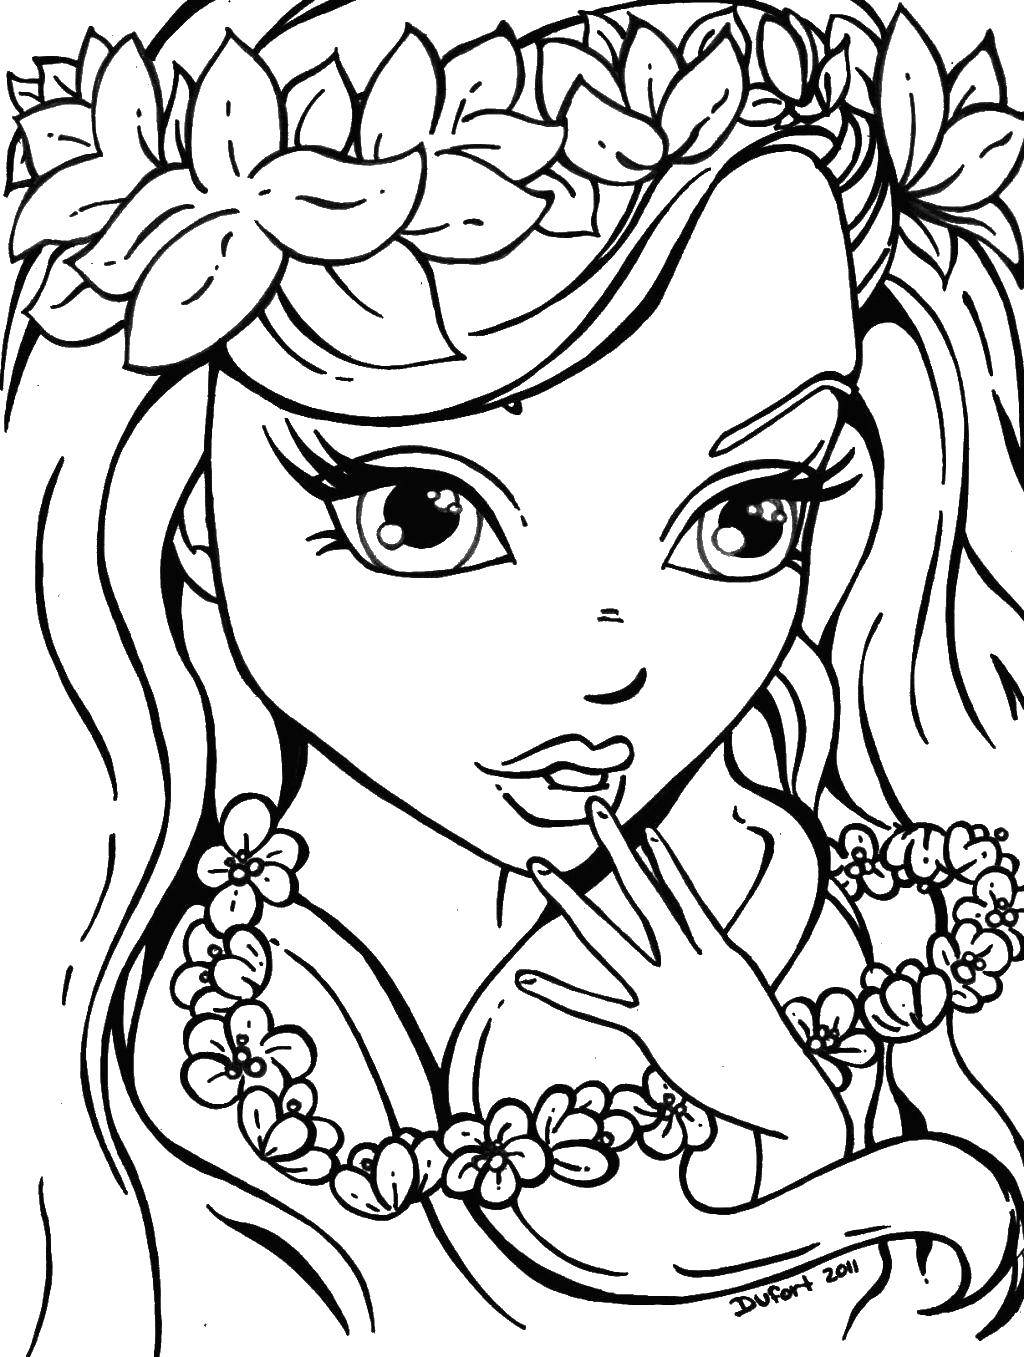 Coloring Girl with wreath of flowers. Category For girls. Tags:  girl , wreath, flowers.